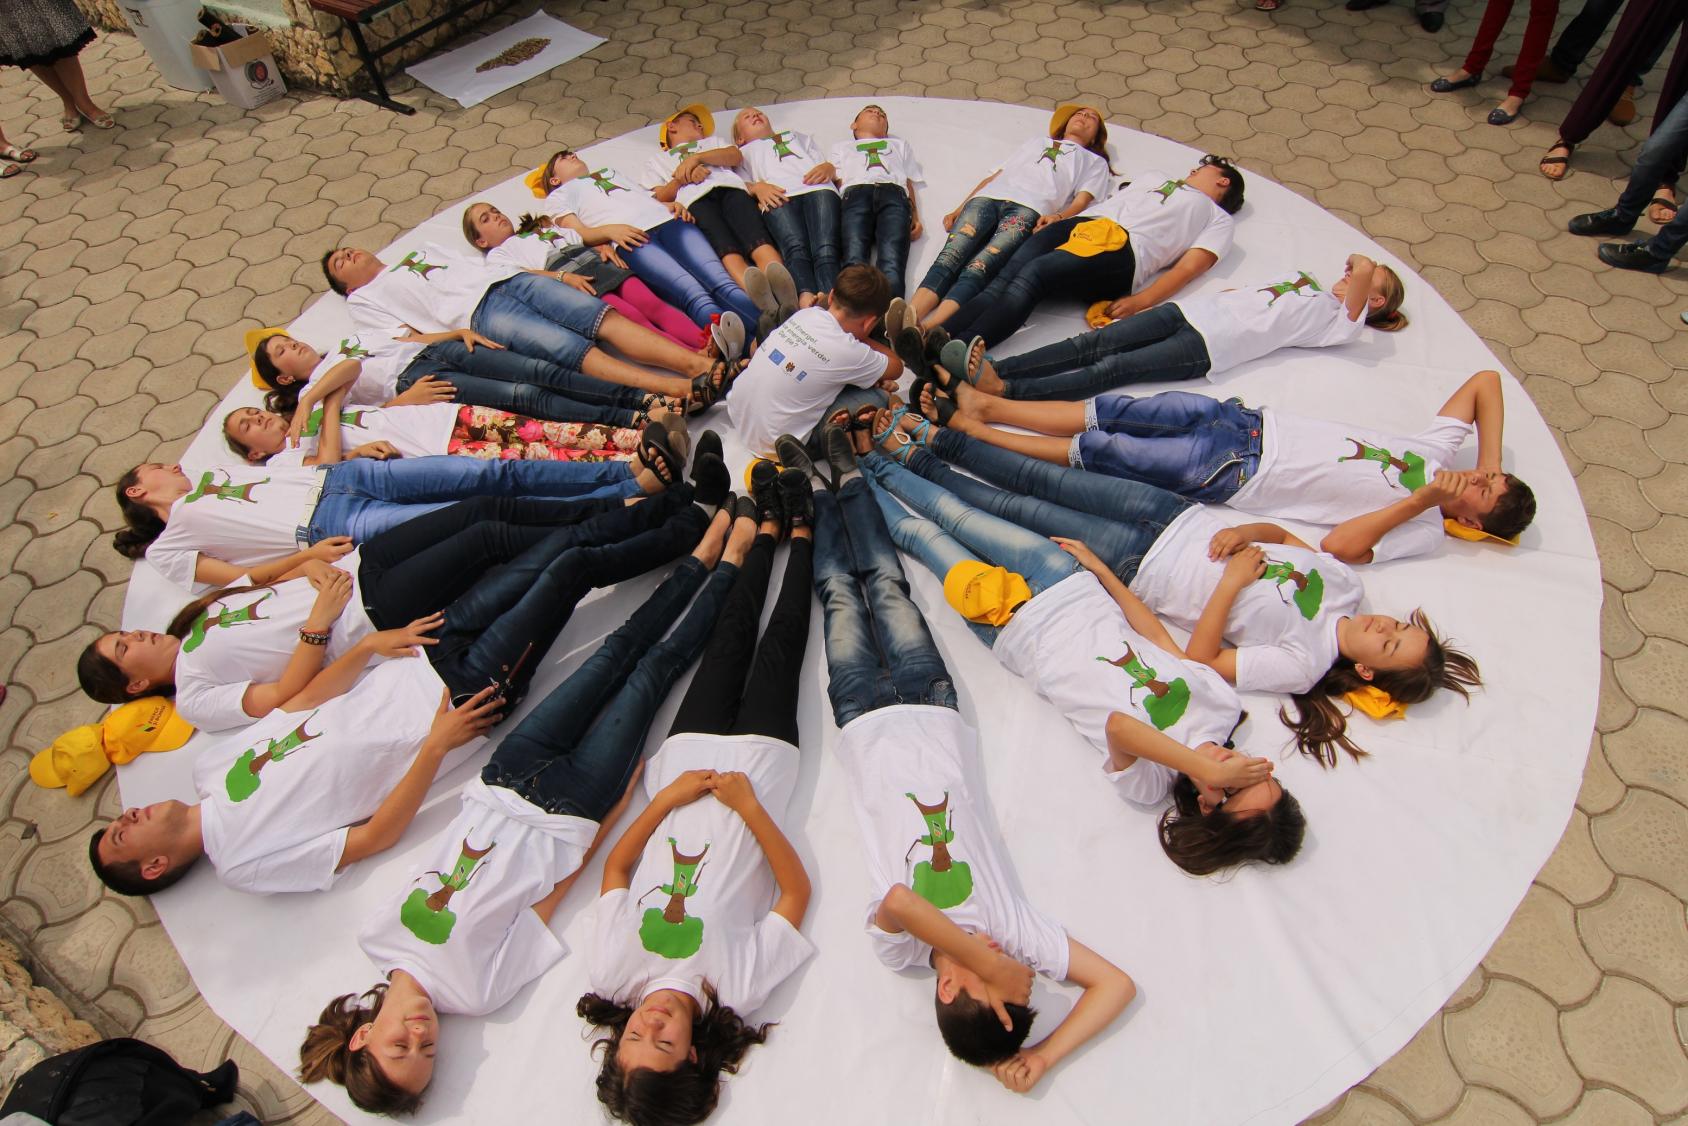 Youth lay in a circle